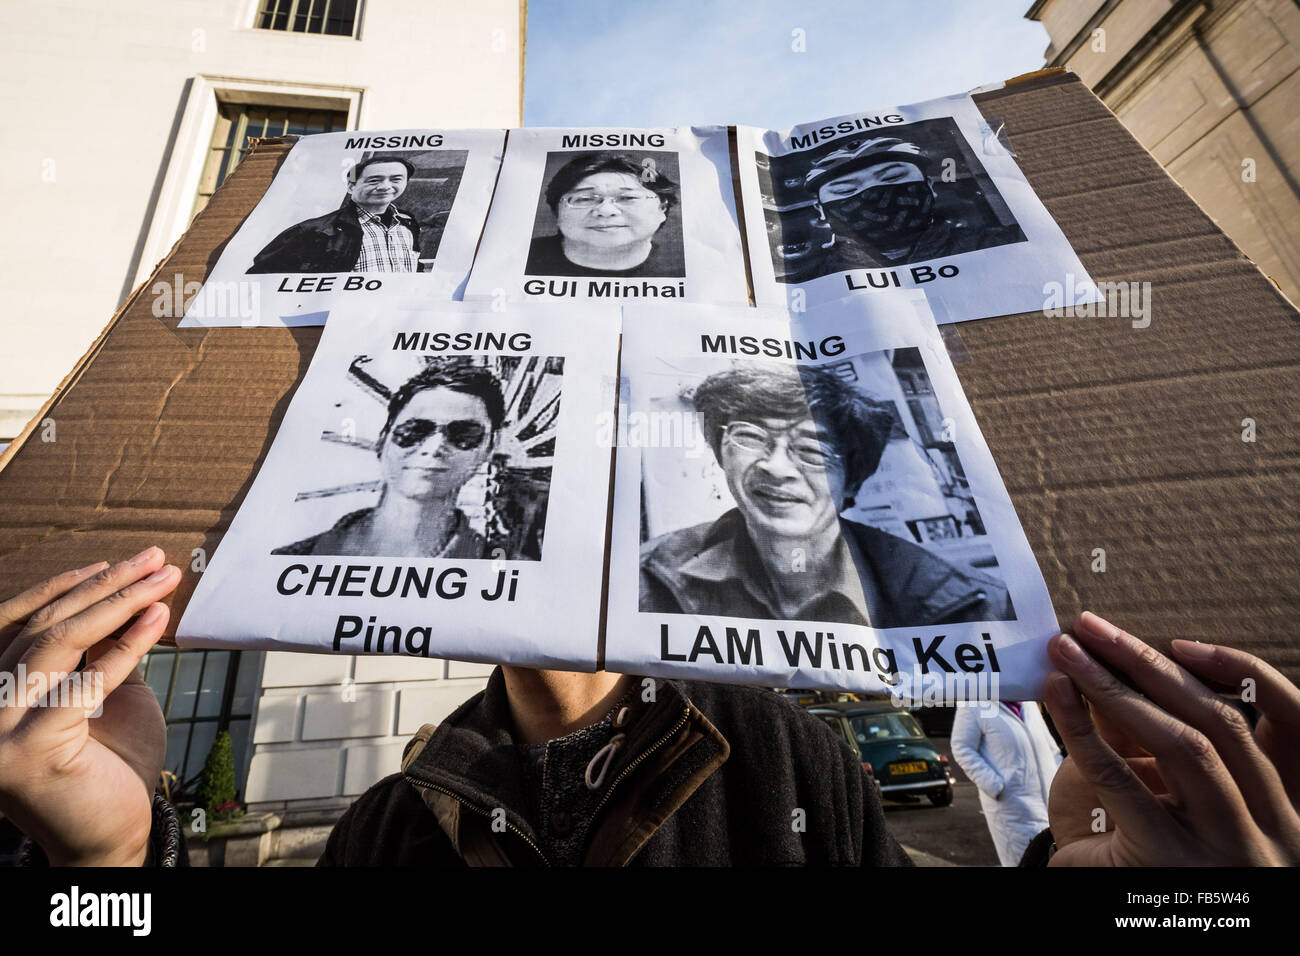 London, UK. 10th January, 2016. Protesters outside the London Chinese Embassy urging Hong Kongers to condemn China government of cross border abduction and disappearance of co-owners and employees of a bookshop in Hong Kong which sold politically sensitive books critical of Chinese Communist Party leader Credit:  Guy Corbishley/Alamy Live News Stock Photo